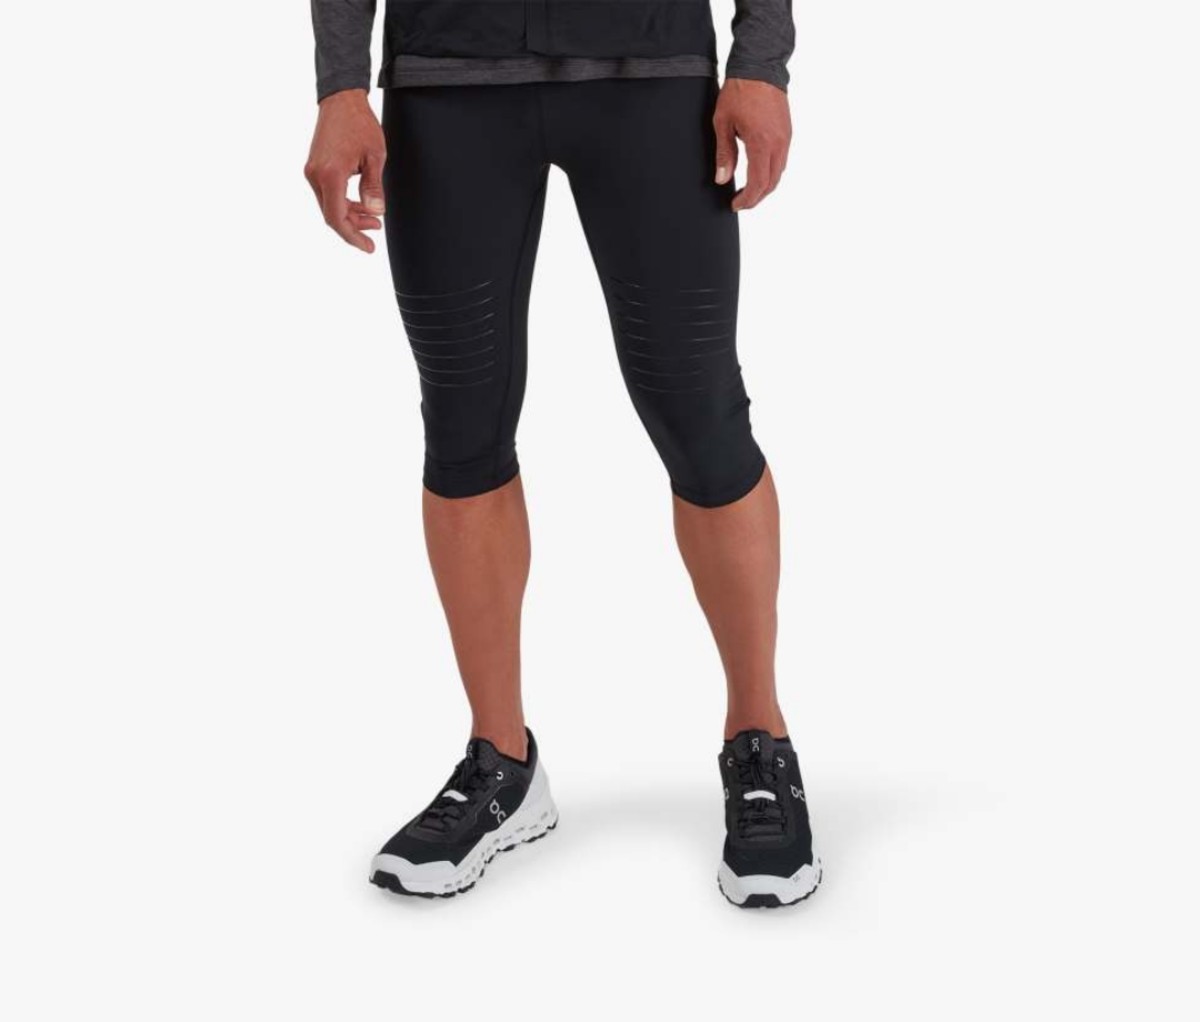 The Best Men's Running Tights To Protect Your Legs - The Manual